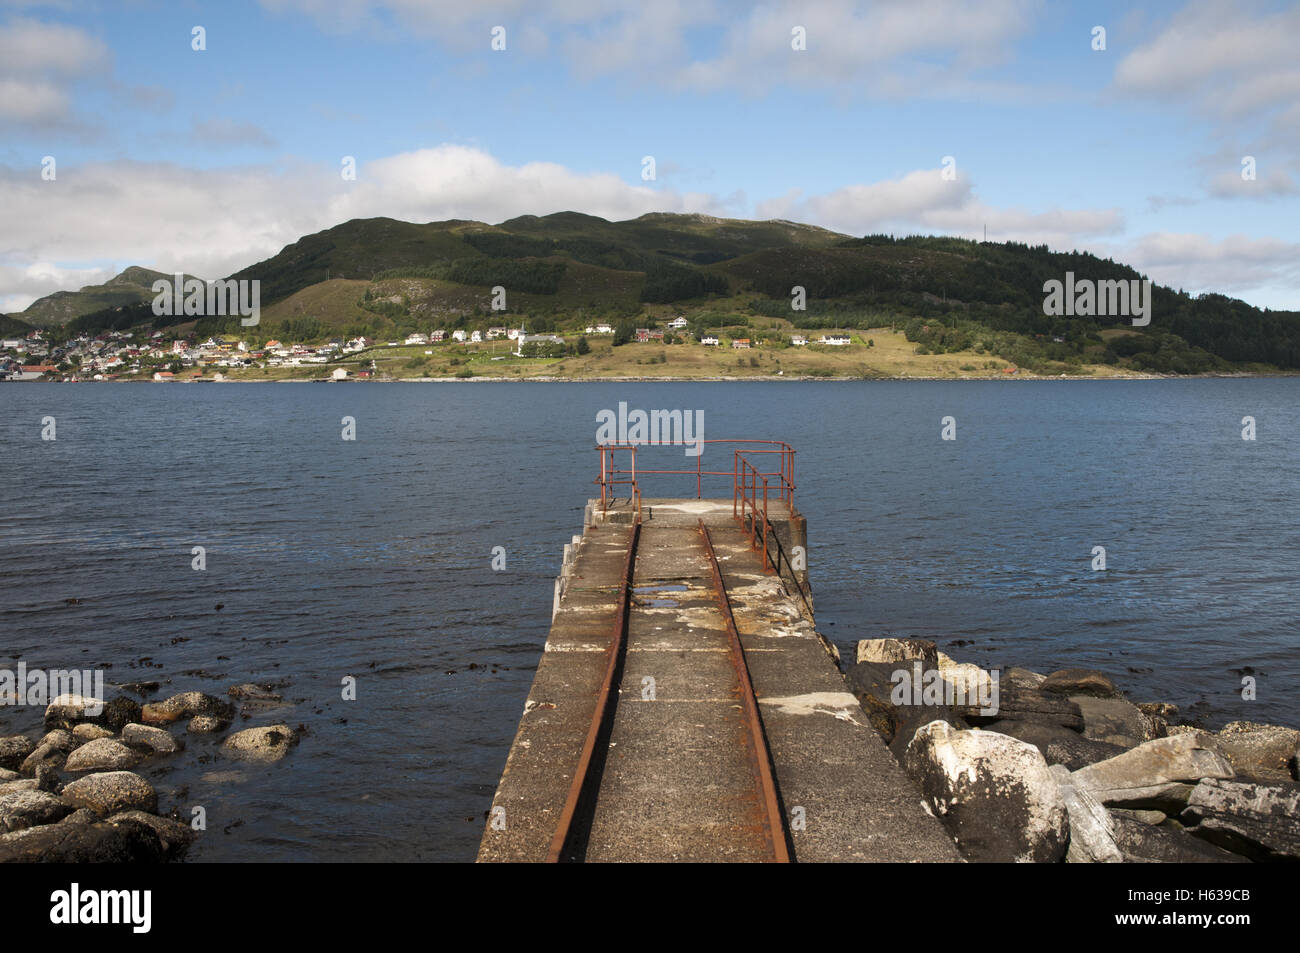 Small town of Måløy on Vågsøy island seen from Ulvesund lighthouse, western Norway. Stock Photo